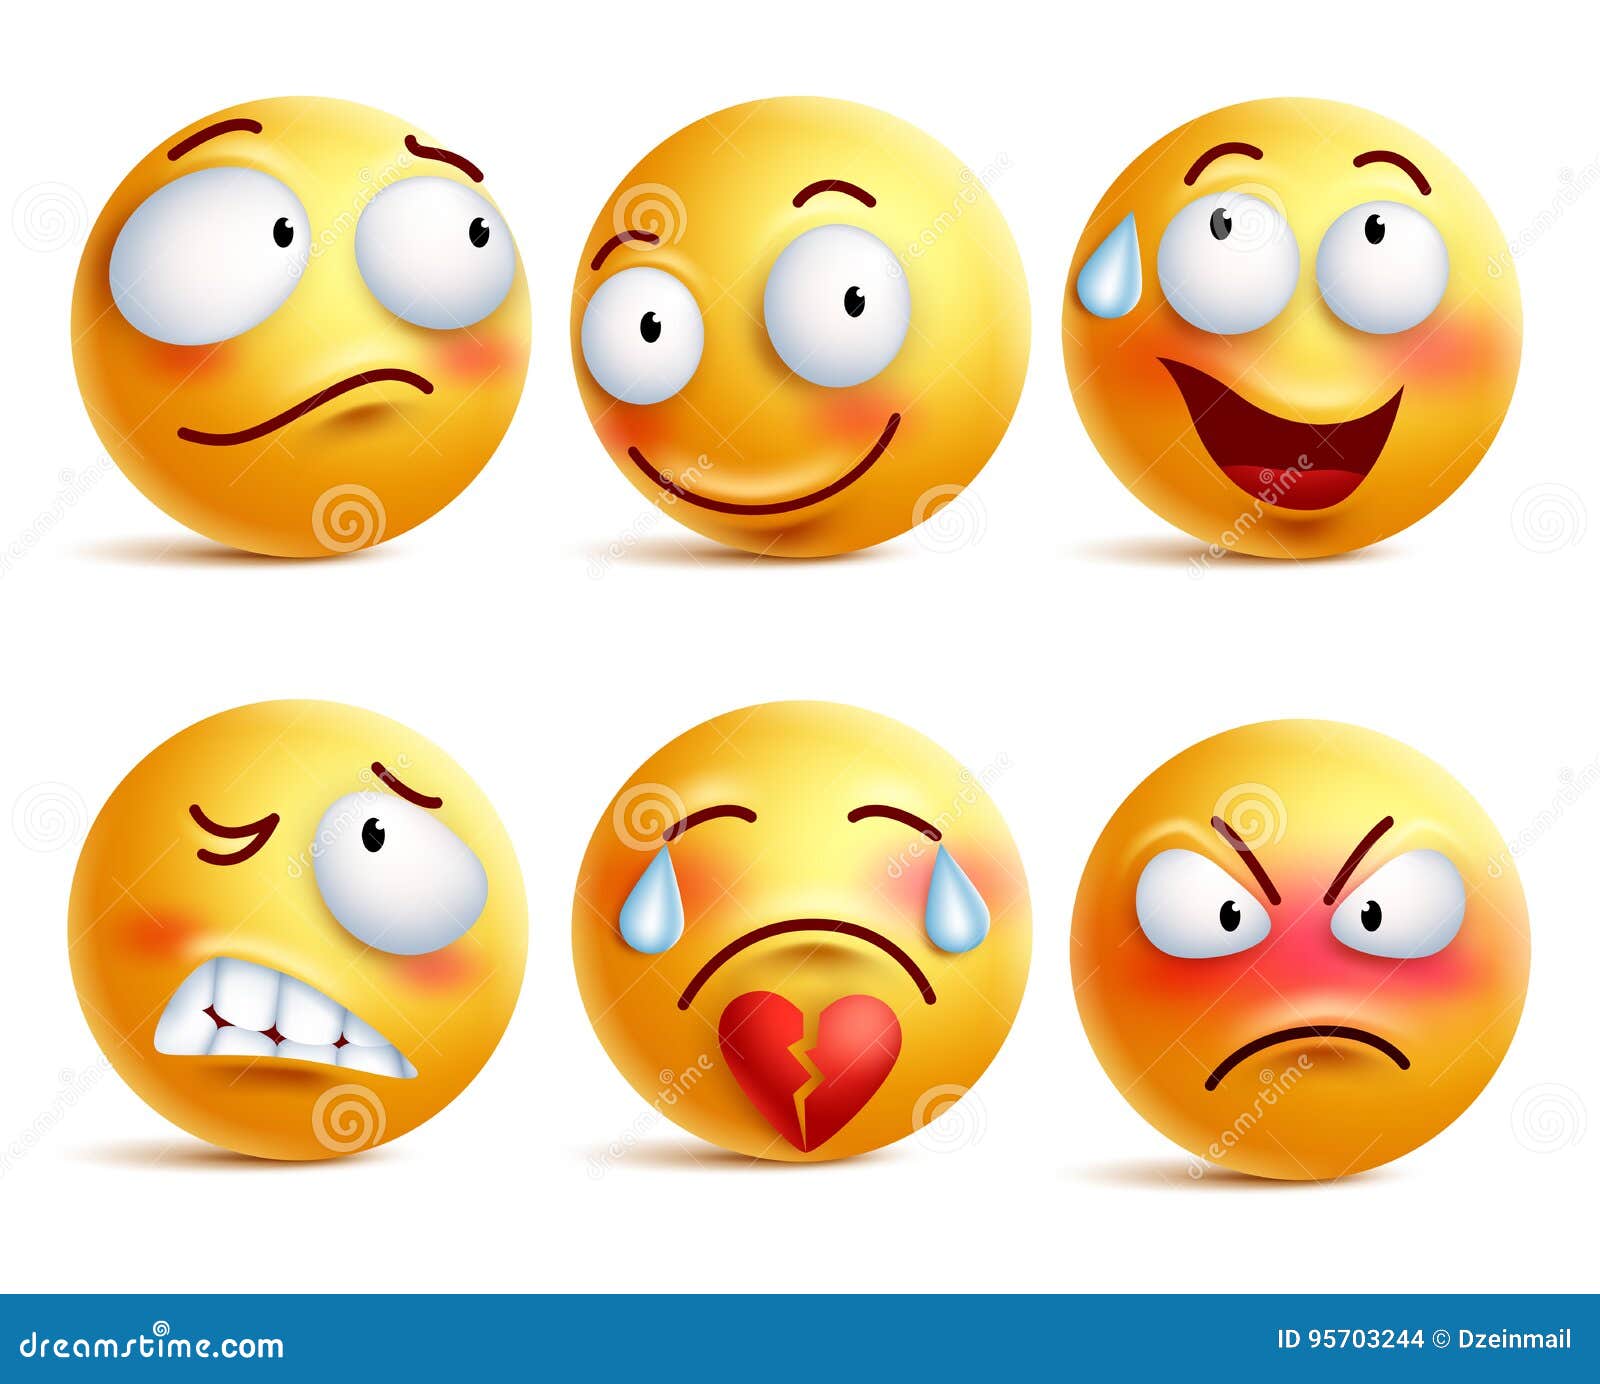 smileys  set. smiley face or yellow emoticons with facial expressions